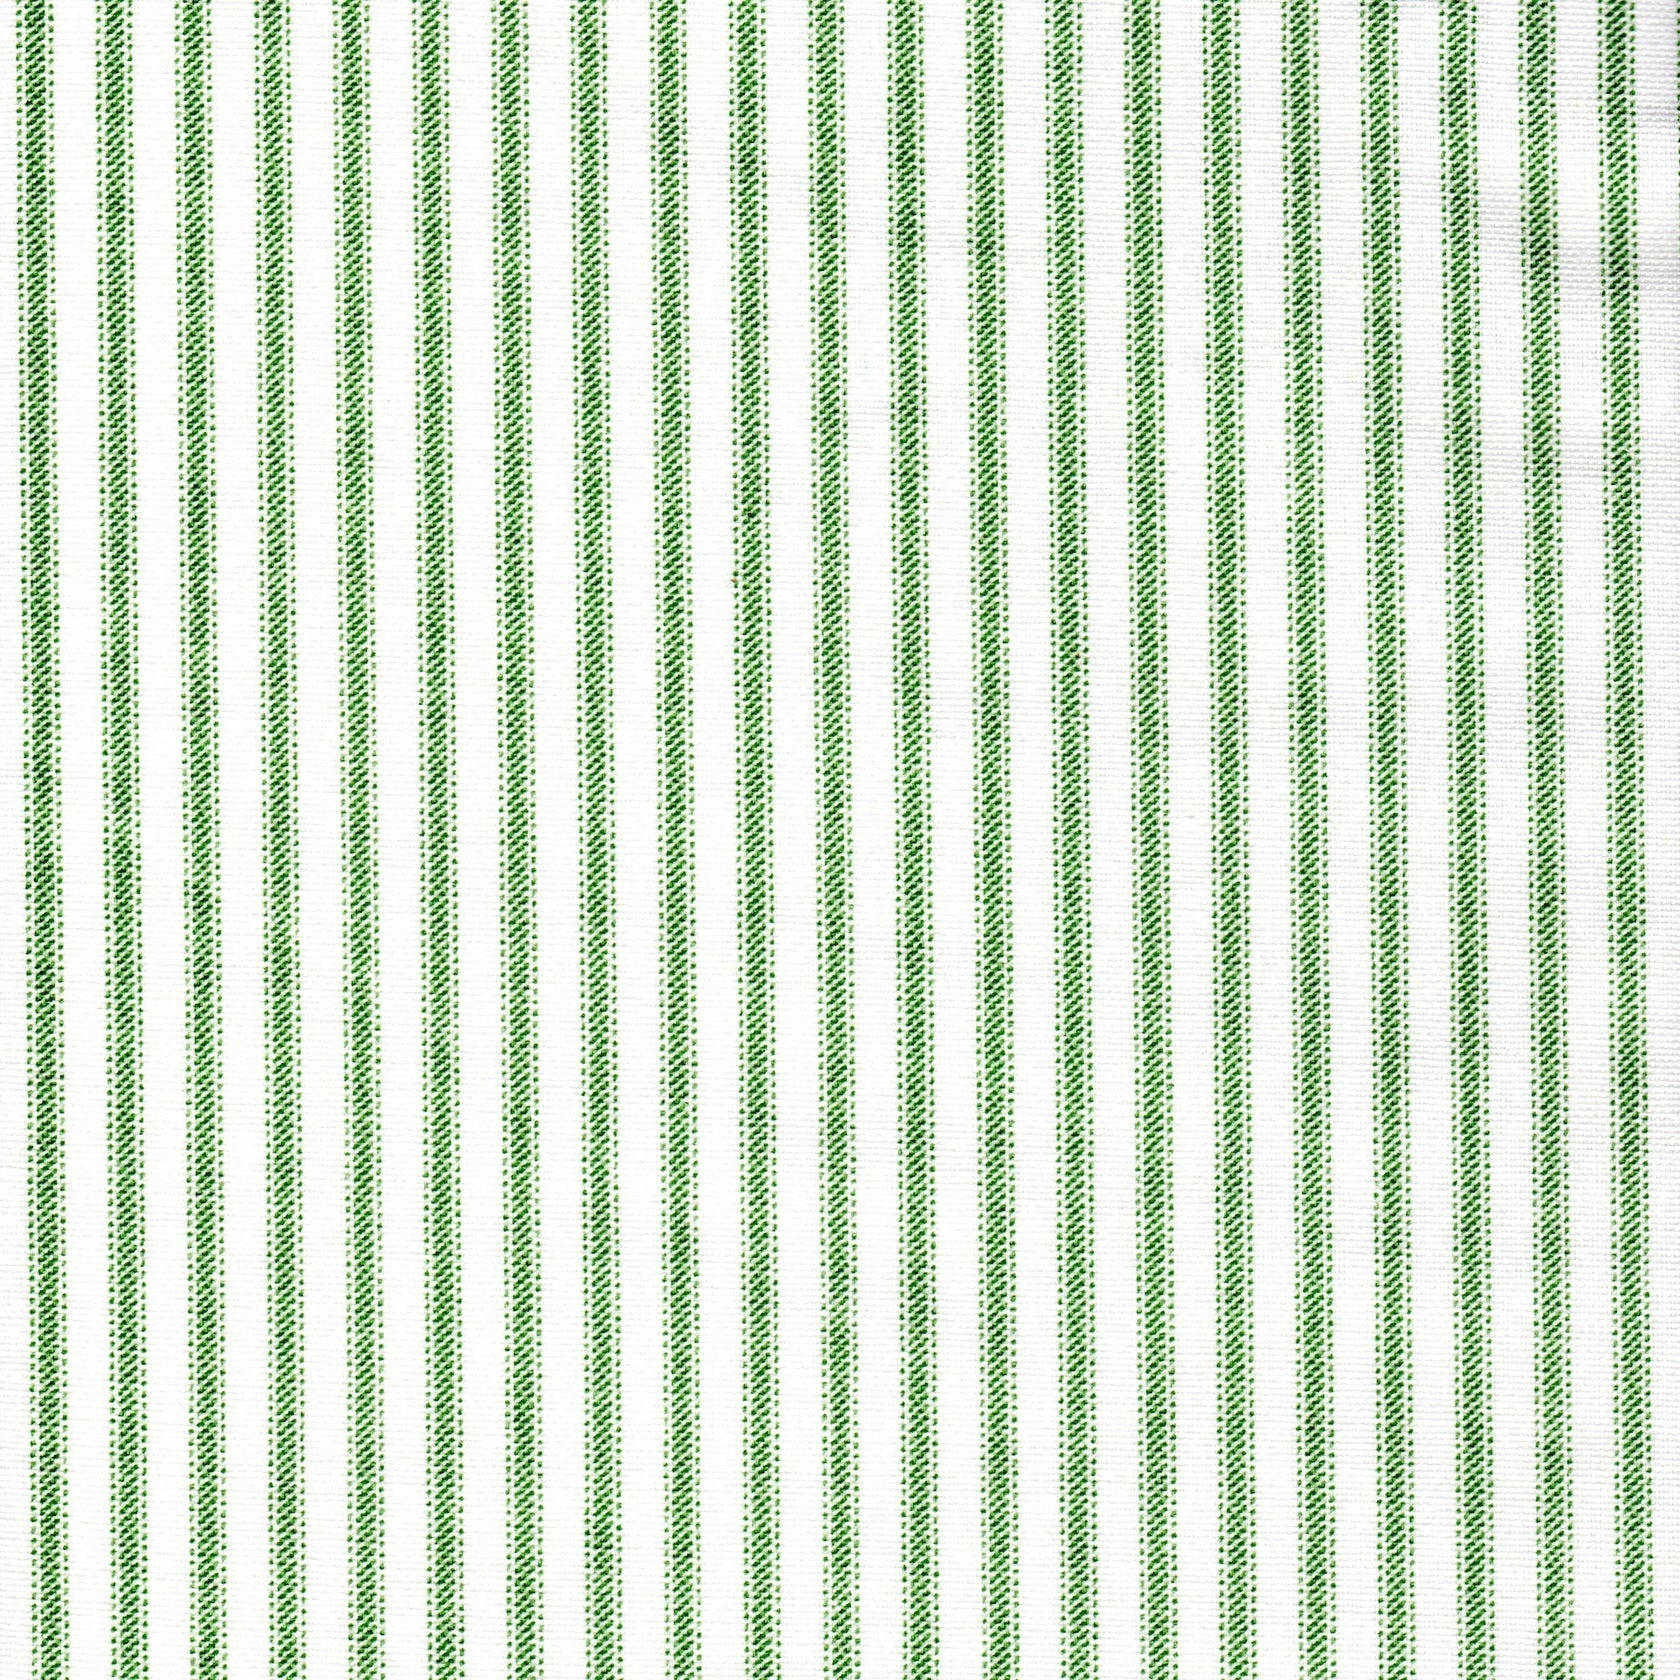 scallop valance in Classic Pine Green Ticking Stripe on White